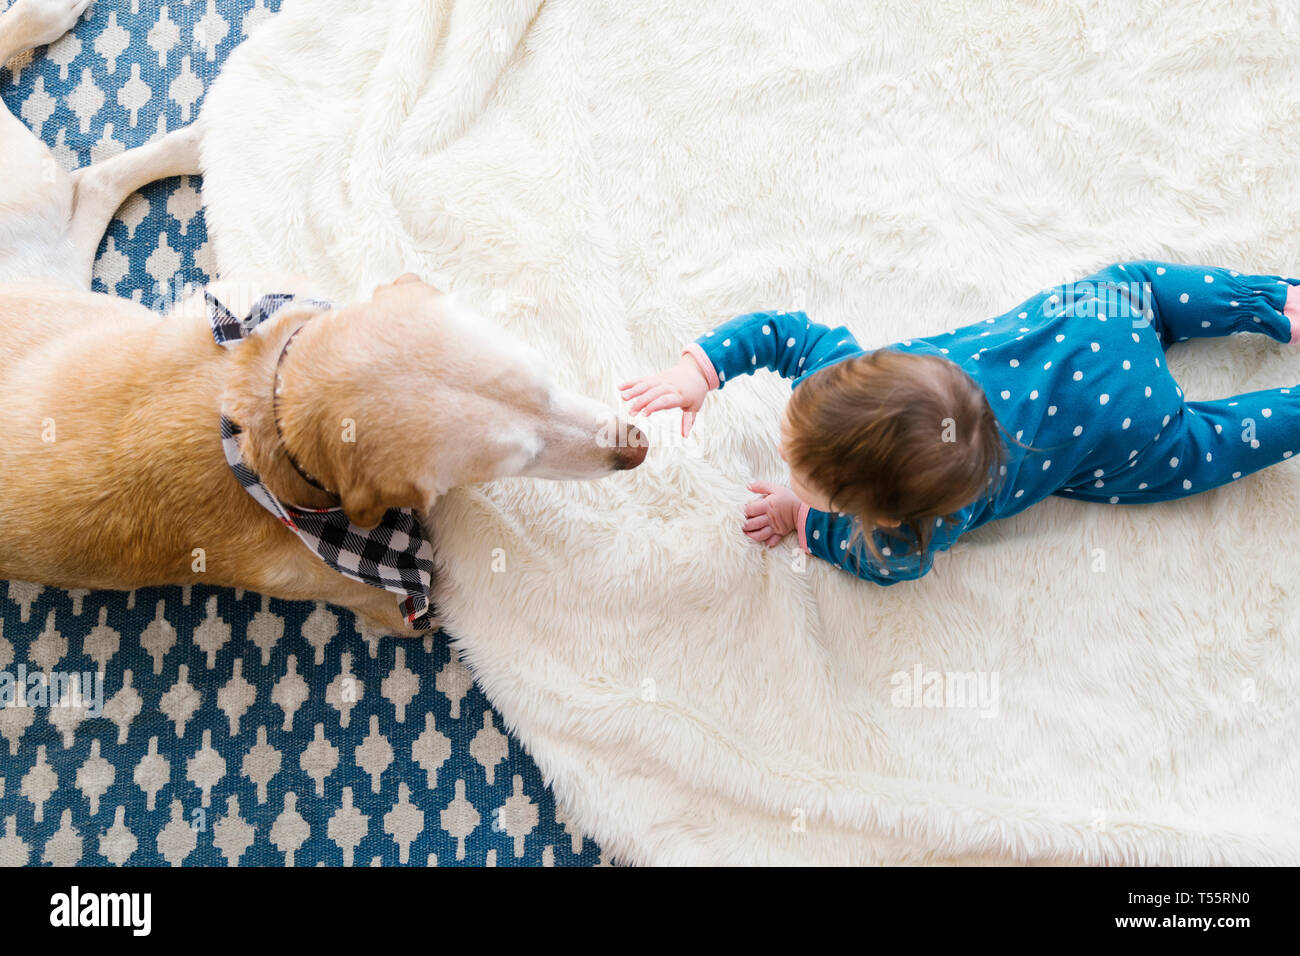 View directly above dog and baby girl Stock Photo